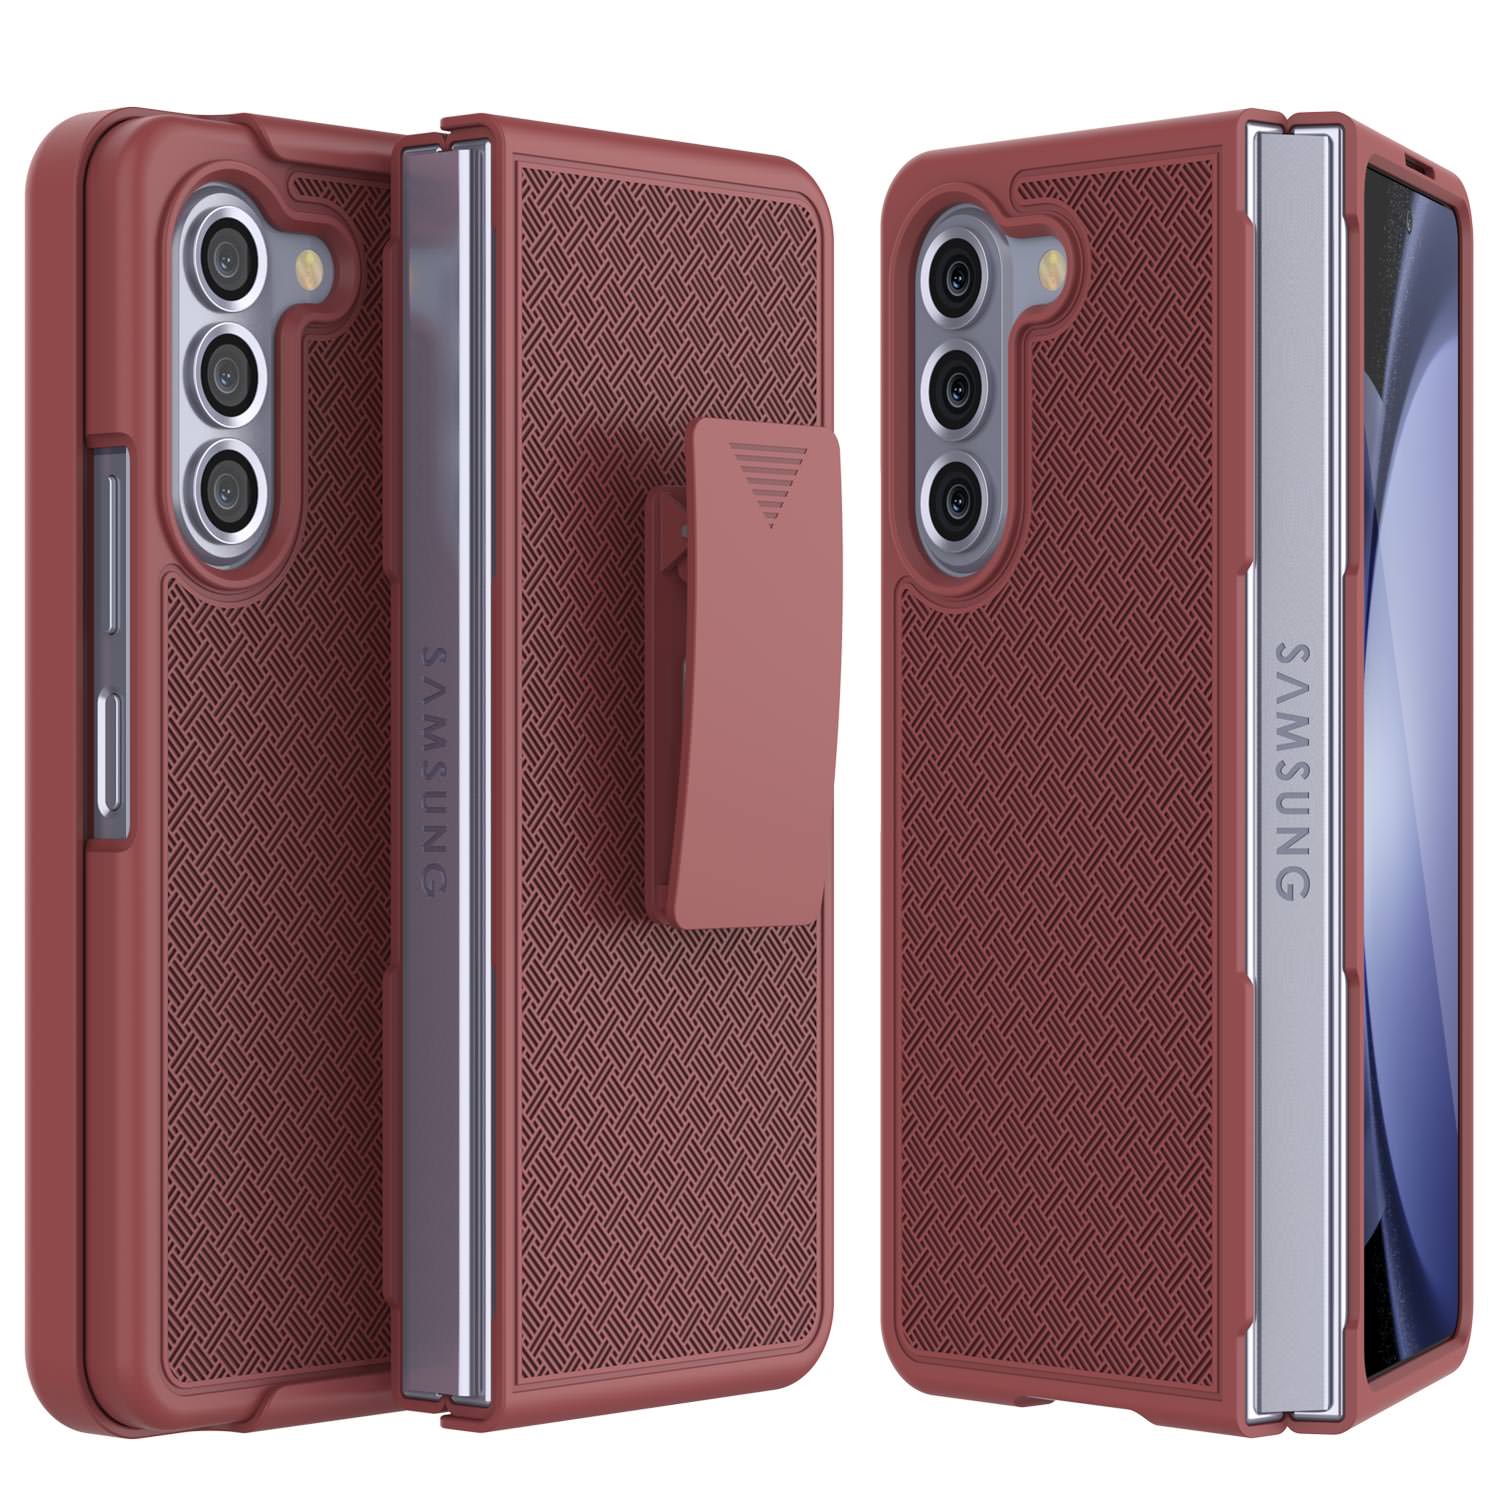 Galaxy Z Fold5 Case With Tempered Glass Screen Protector, Holster Belt Clip & Built-In Kickstand [Red]